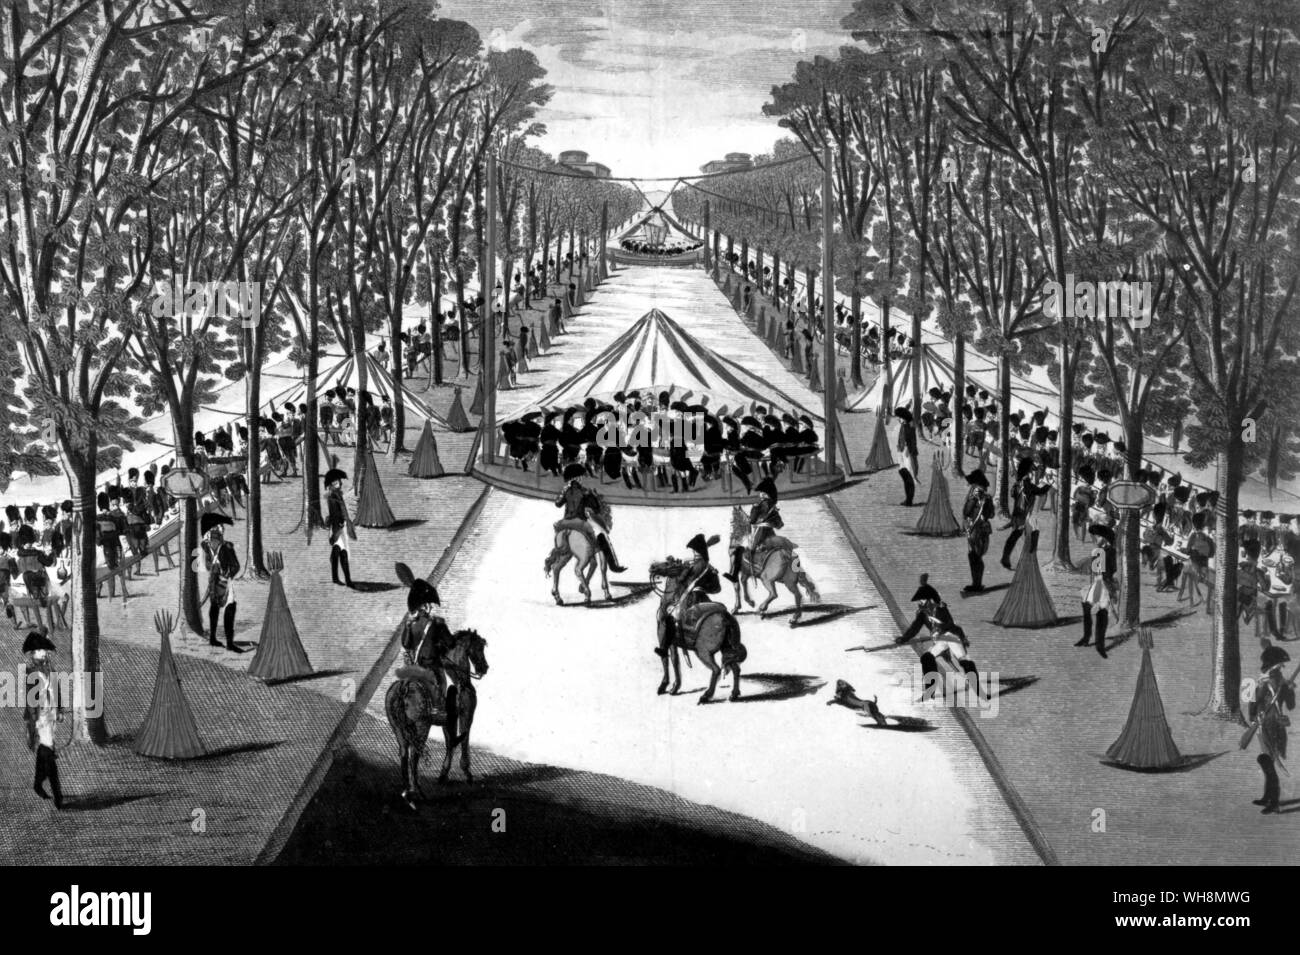 ... military parade succeeded military parade in celebration of peace...' the city of Paris celebrating the return of the Imperial Guard in November 1807. Bibliotheque Nationale, Paris. Photo: Collection Viollet. Stock Photo